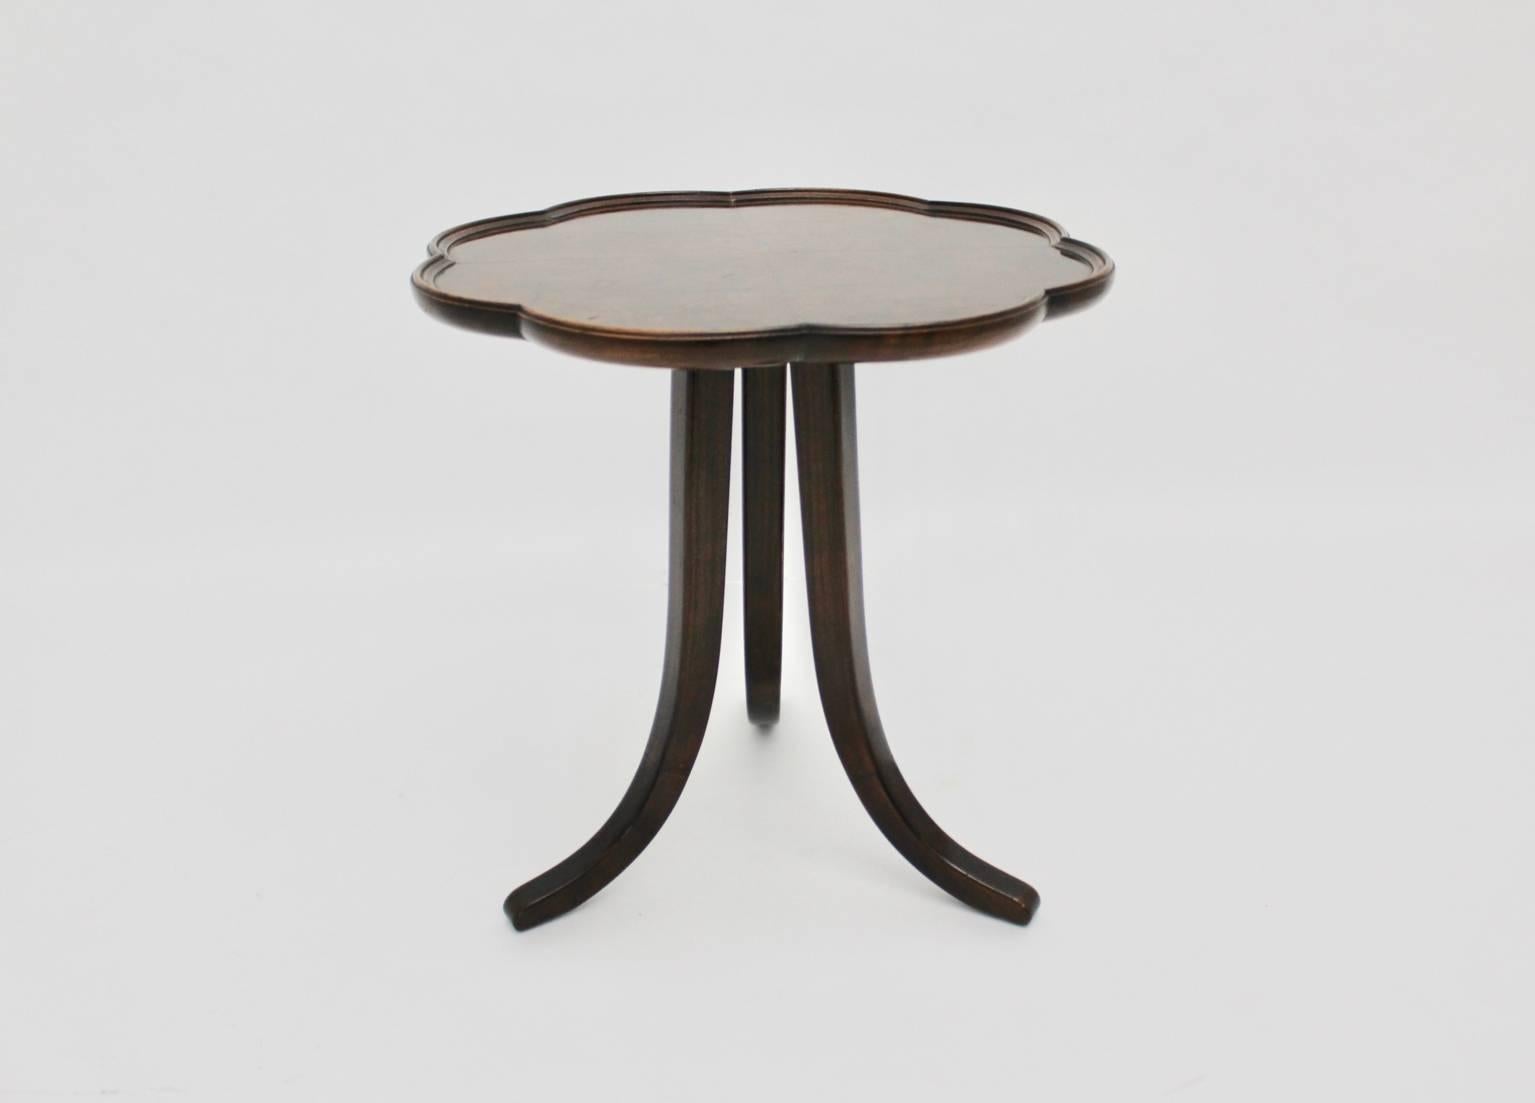 Charming Art Deco side table from circa 1925 from the well-known interior designer and architect Josef Frank designed for Haus & Garten in Vienna.

The three solid bent beechwood feet are walnut stained and the top is veneered with walnut root